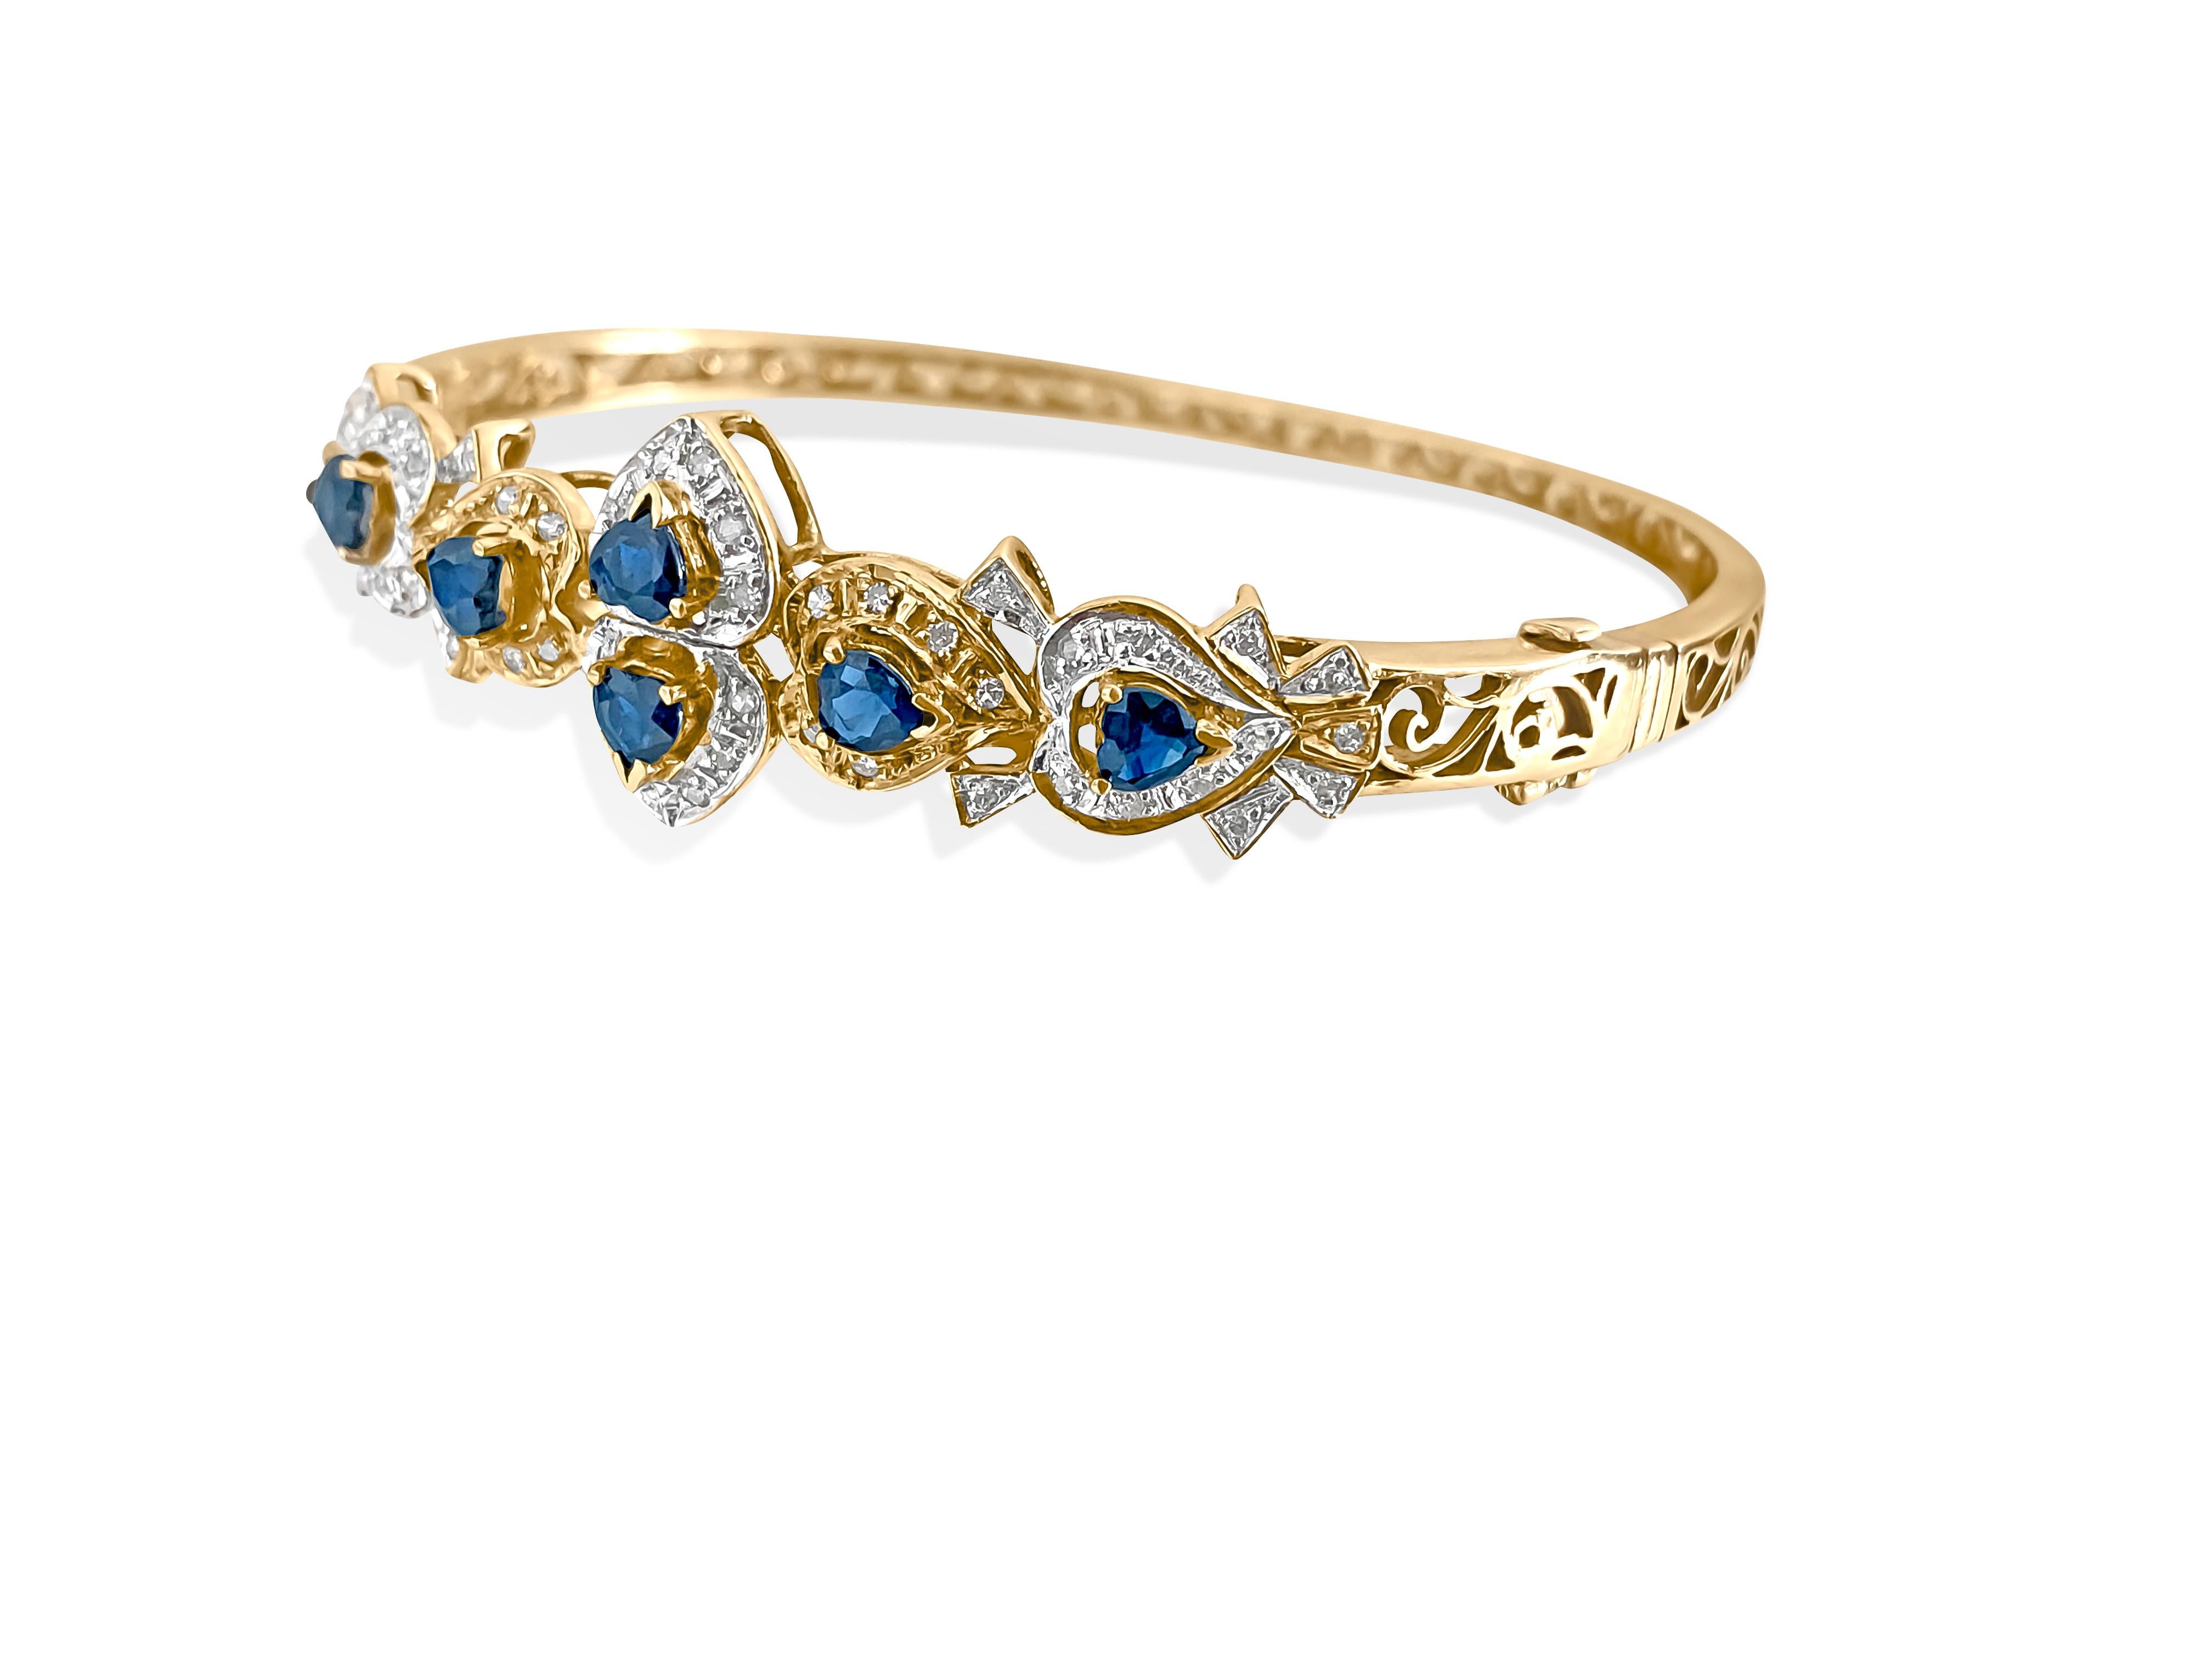 Metal: 14K yellow gold. 
2.00 ct blue sapphire total. 100% natural earth mined. Heart shaped blue sapphire. 

100% natural earth mined side diamonds. Round brilliant diamonds. Nice shine and luster. 
Handmade womens bracelet. Vintage style bracelet.